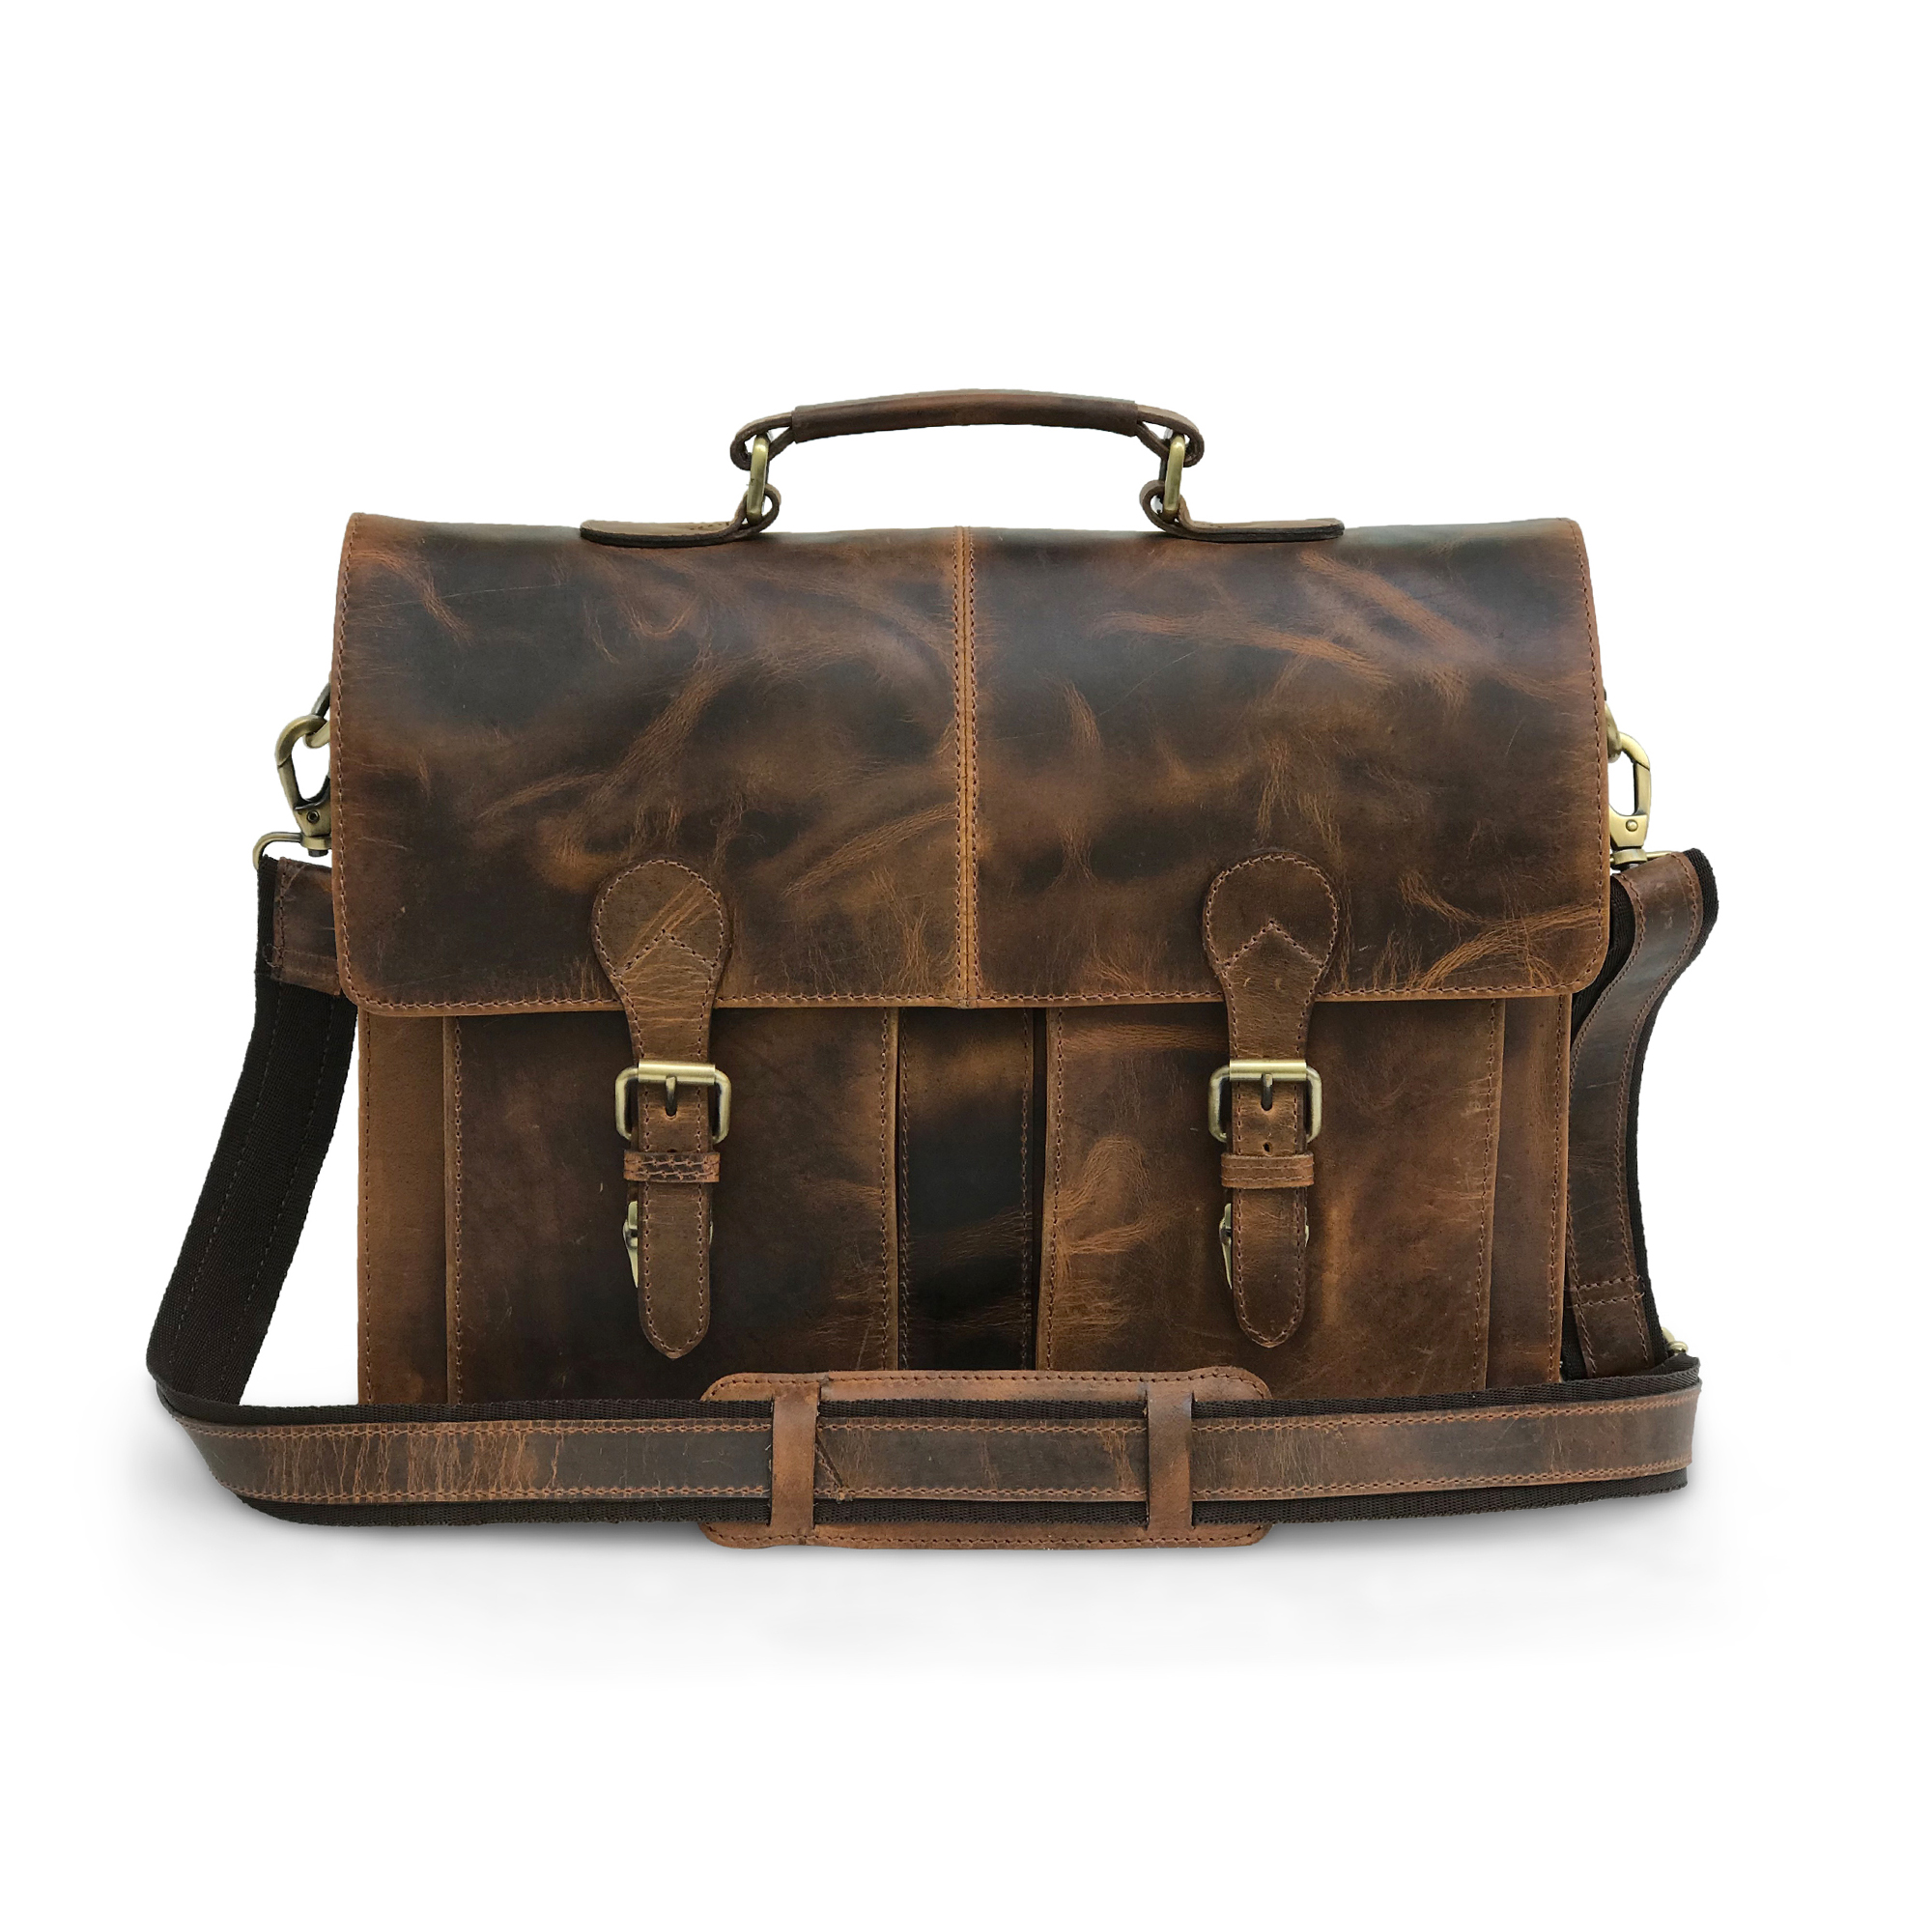 Marcellus Soft Leather Briefcase Bag | Zakara International | Buy Real ...